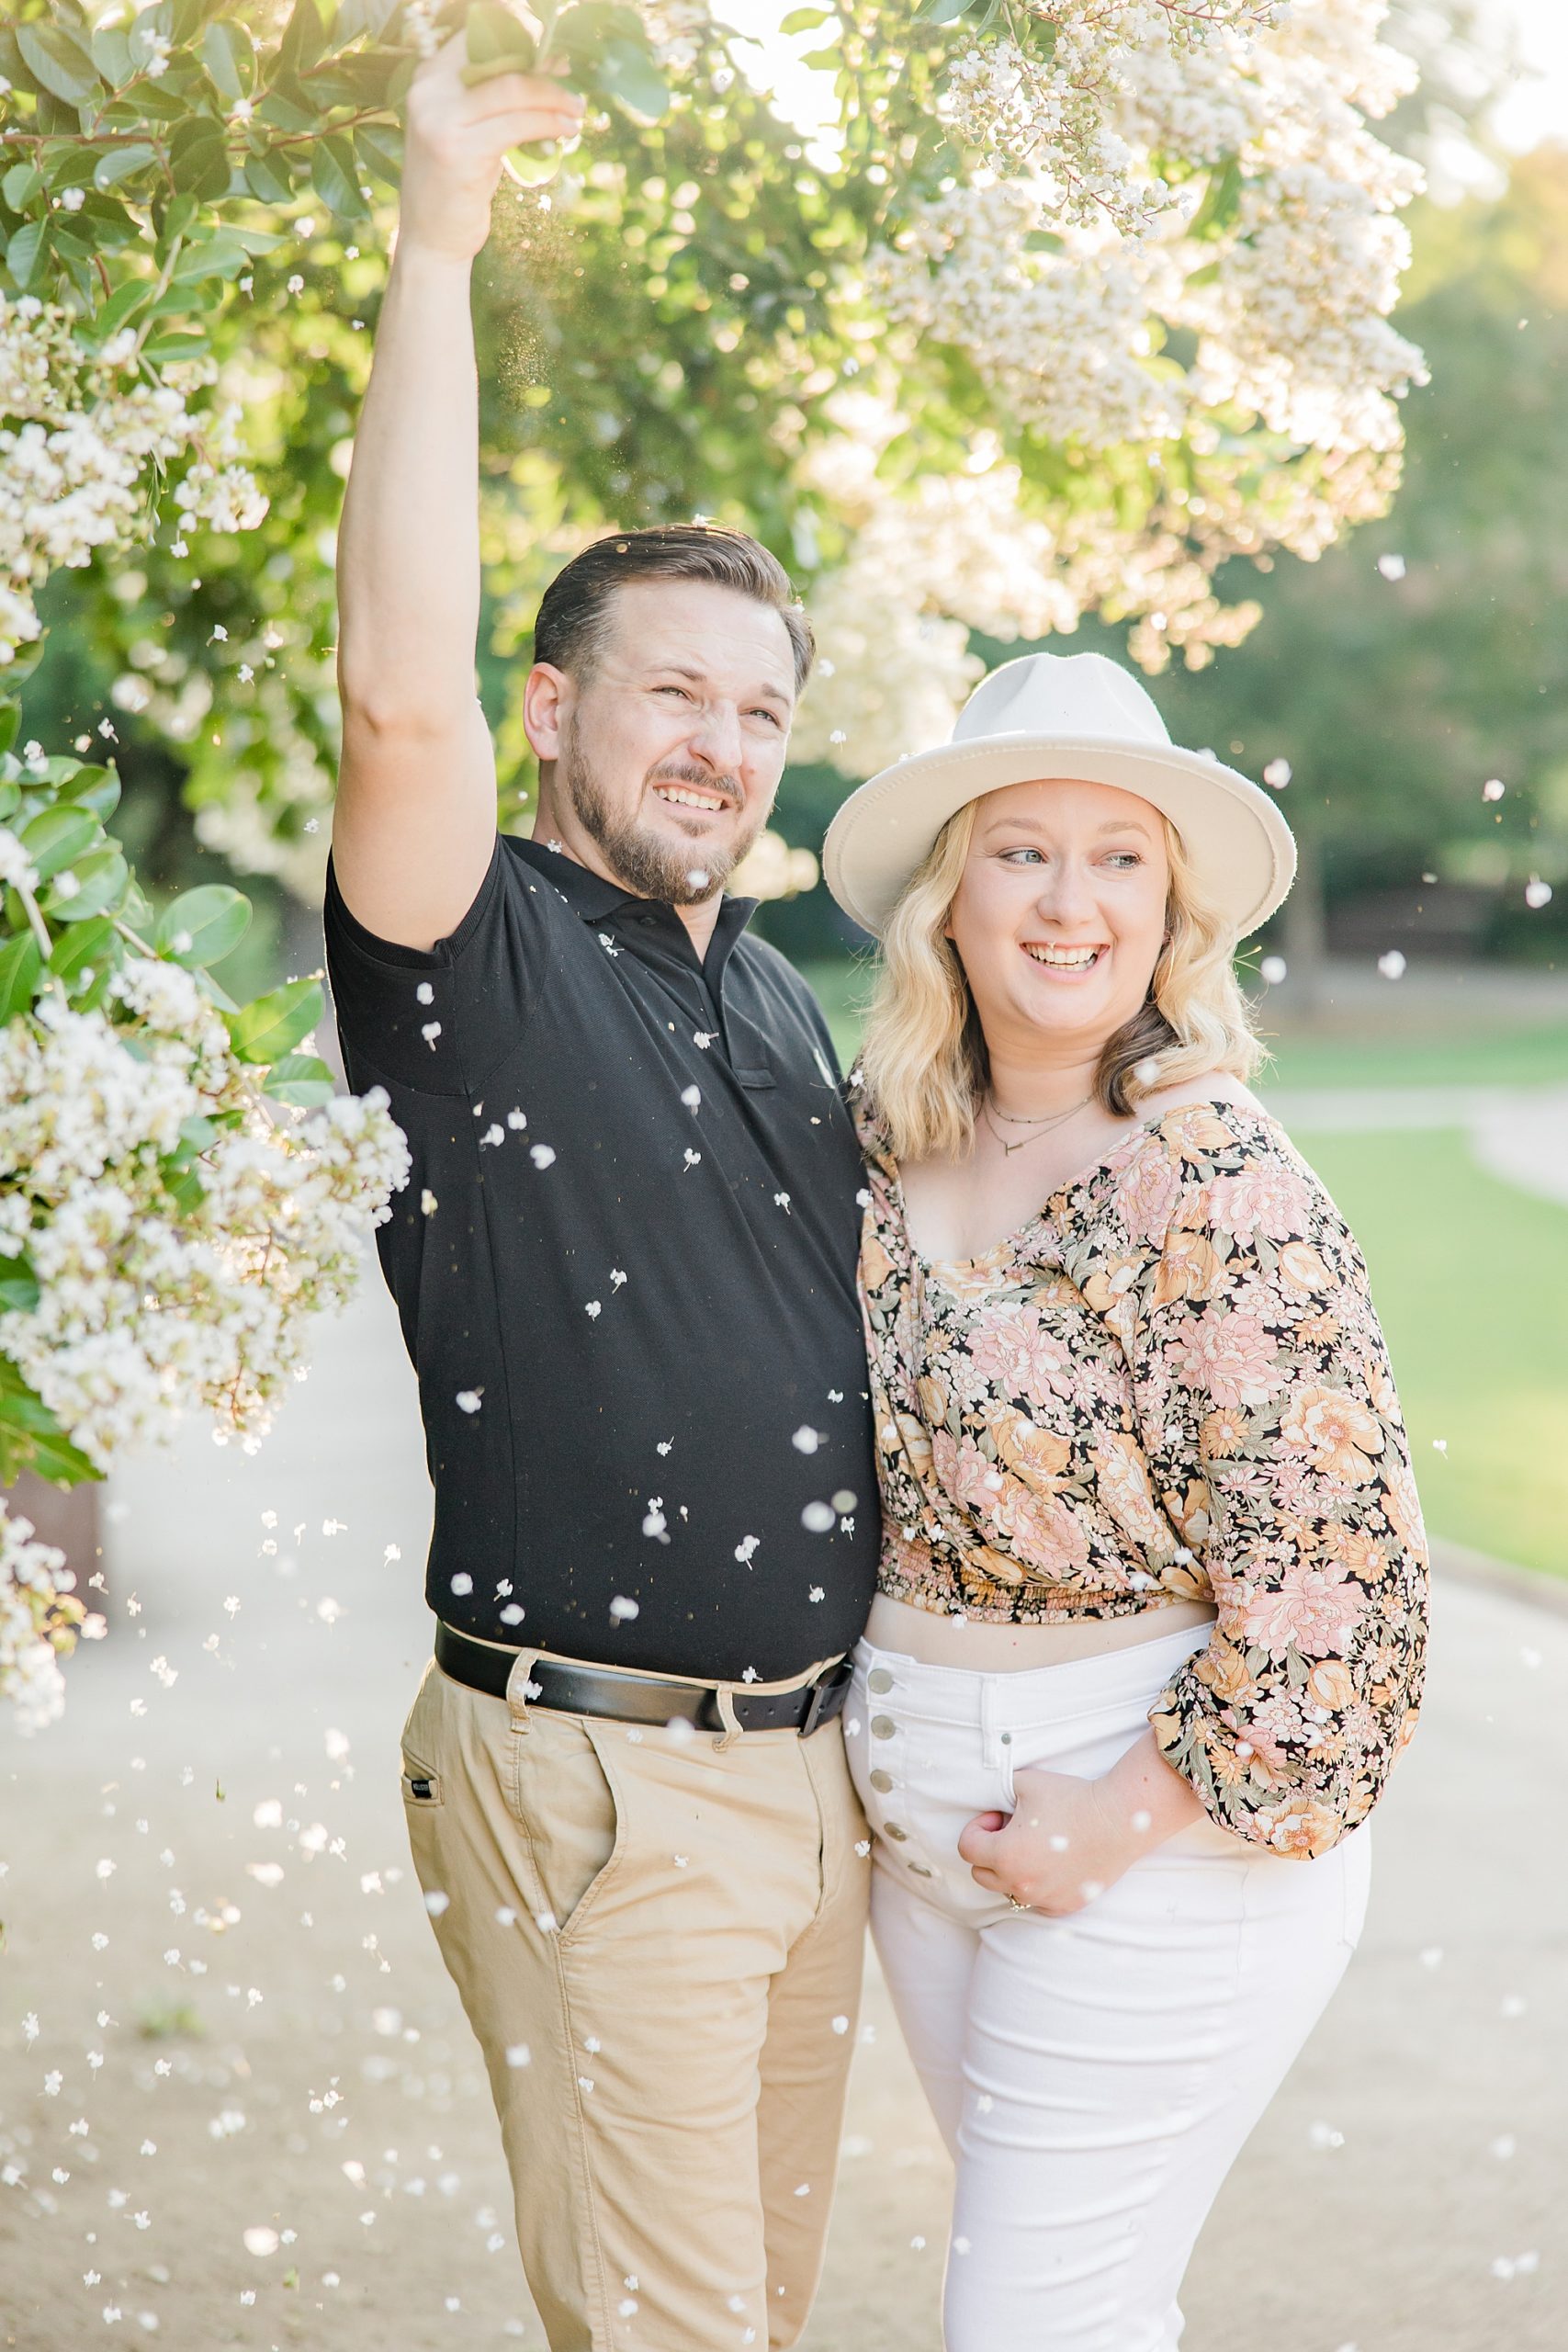 groom shakes tree so petals fall during engagement photos 